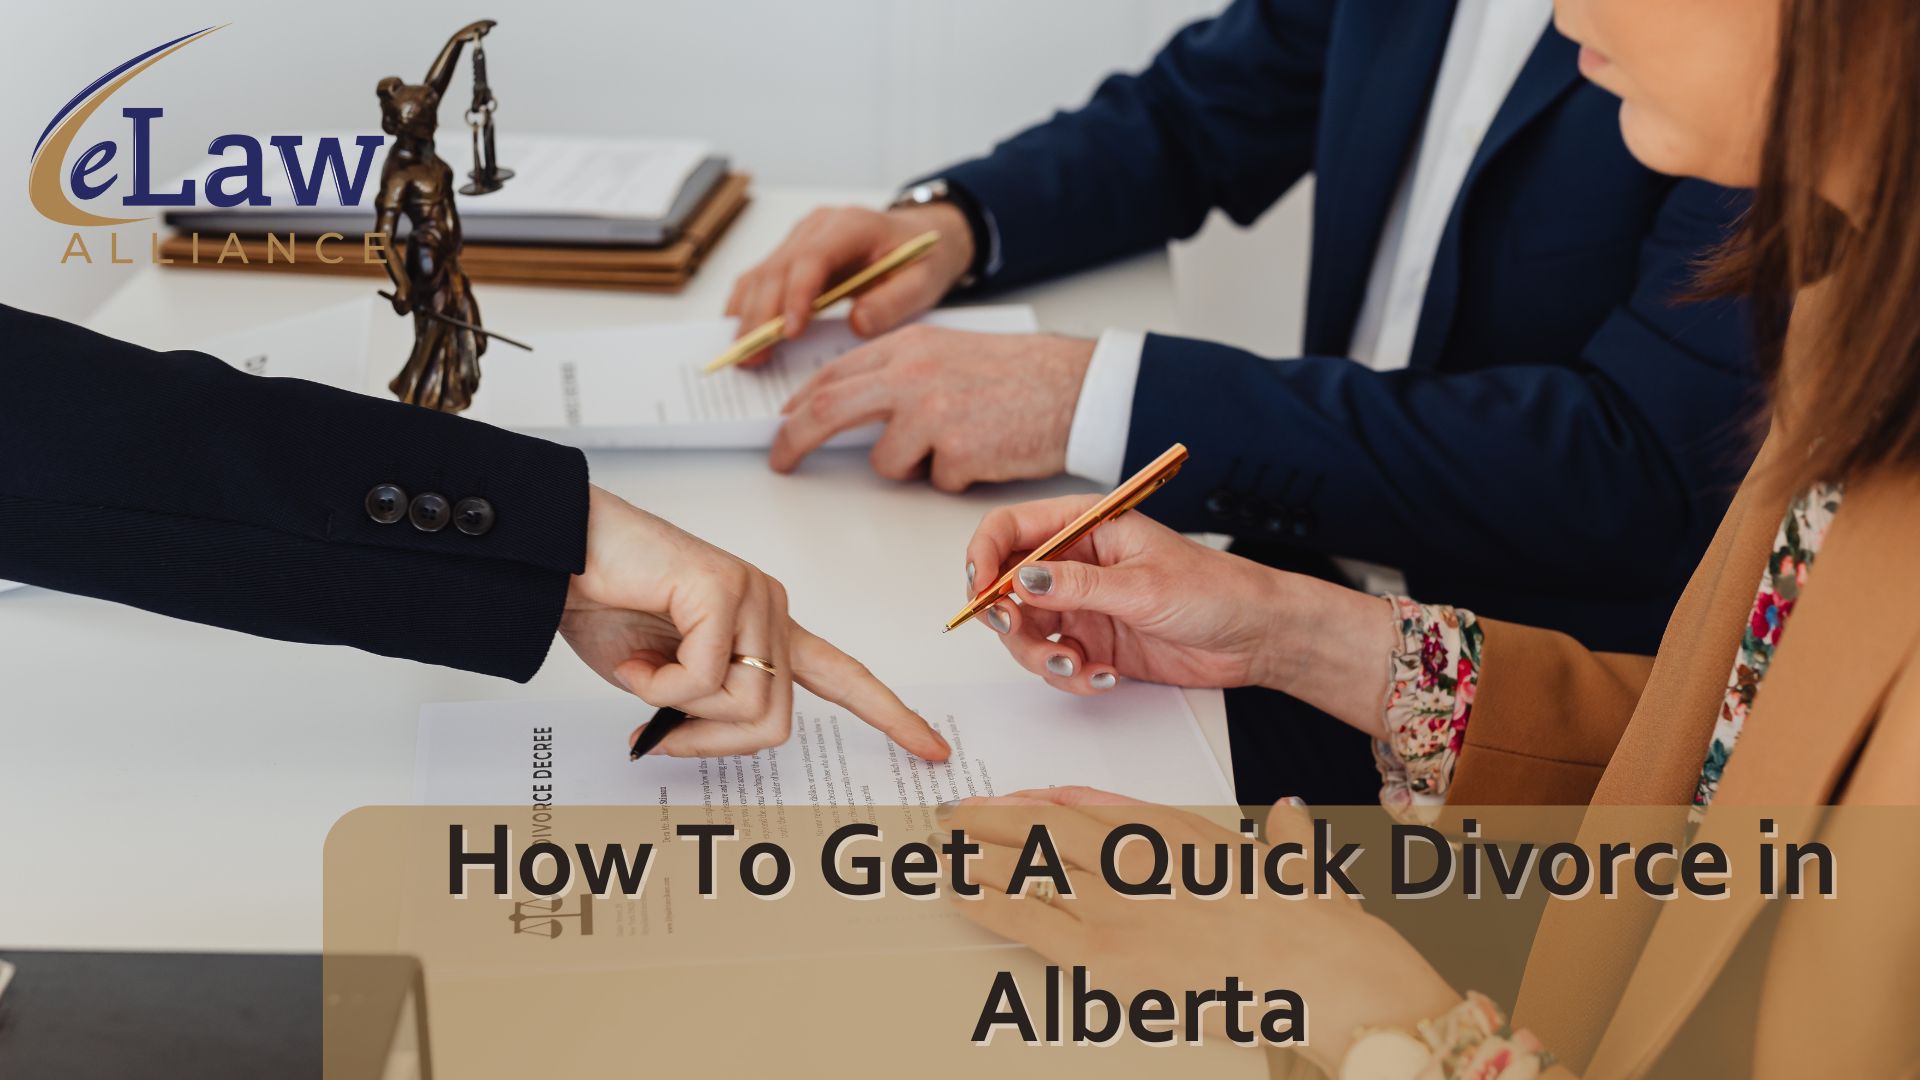 How To Get A Quick Divorce in Alberta